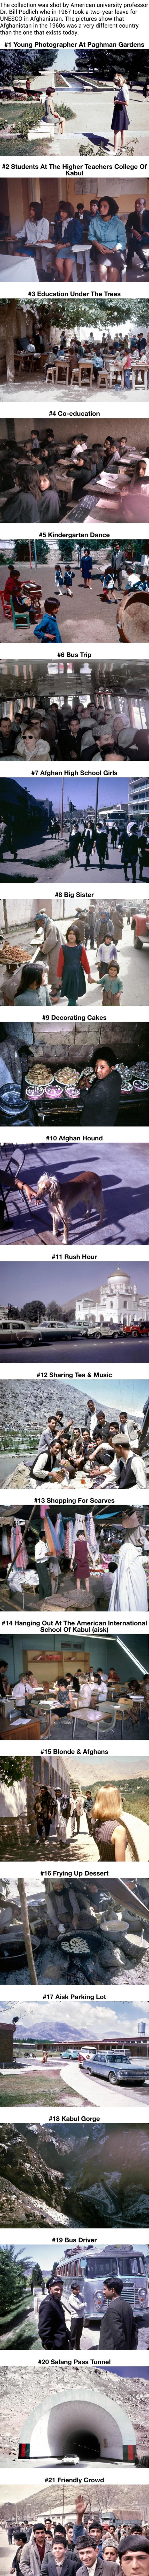 Afghanistan in the 60s